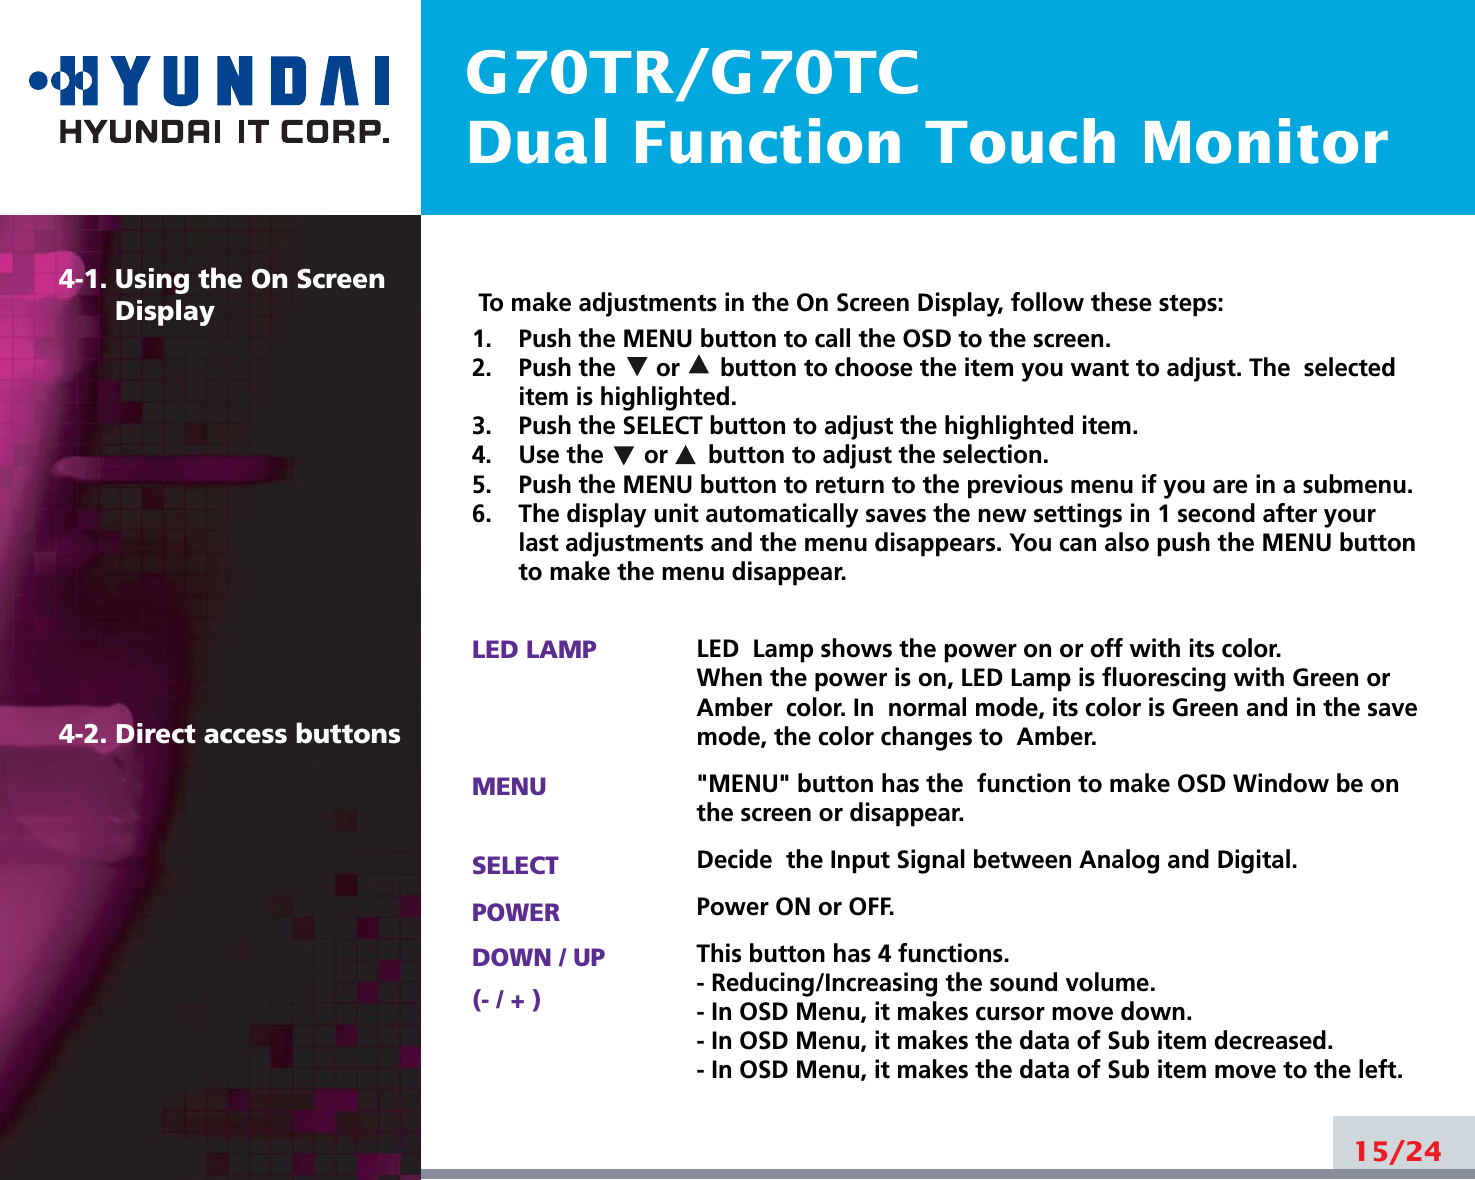 G70TR/G70TCDual Function Touch Monitor4-1. Using the On ScreenDisplay 4-2. Direct access buttons15/24To make adjustments in the On Screen Display, follow these steps:1.    Push the MENU button to call the OSD to the screen. 2.    Push the      or      button to choose the item you want to adjust. The  selecteditem is highlighted.3.    Push the SELECT button to adjust the highlighted item. 4.    Use the      or      button to adjust the selection.5.    Push the MENU button to return to the previous menu if you are in a submenu.6.    The display unit automatically saves the new settings in 1 second after yourlast adjustments and the menu disappears. You can also push the MENU buttonto make the menu disappear.LED LAMPMENUSELECTPOWERDOWN / UP(- / + )LED  Lamp shows the power on or off with its color.When the power is on, LED Lamp is fluorescing with Green orAmber  color. In  normal mode, its color is Green and in the savemode, the color changes to  Amber.&quot;MENU&quot; button has the  function to make OSD Window be onthe screen or disappear.Decide  the Input Signal between Analog and Digital.Power ON or OFF.This button has 4 functions.- Reducing/Increasing the sound volume.- In OSD Menu, it makes cursor move down.- In OSD Menu, it makes the data of Sub item decreased.- In OSD Menu, it makes the data of Sub item move to the left.